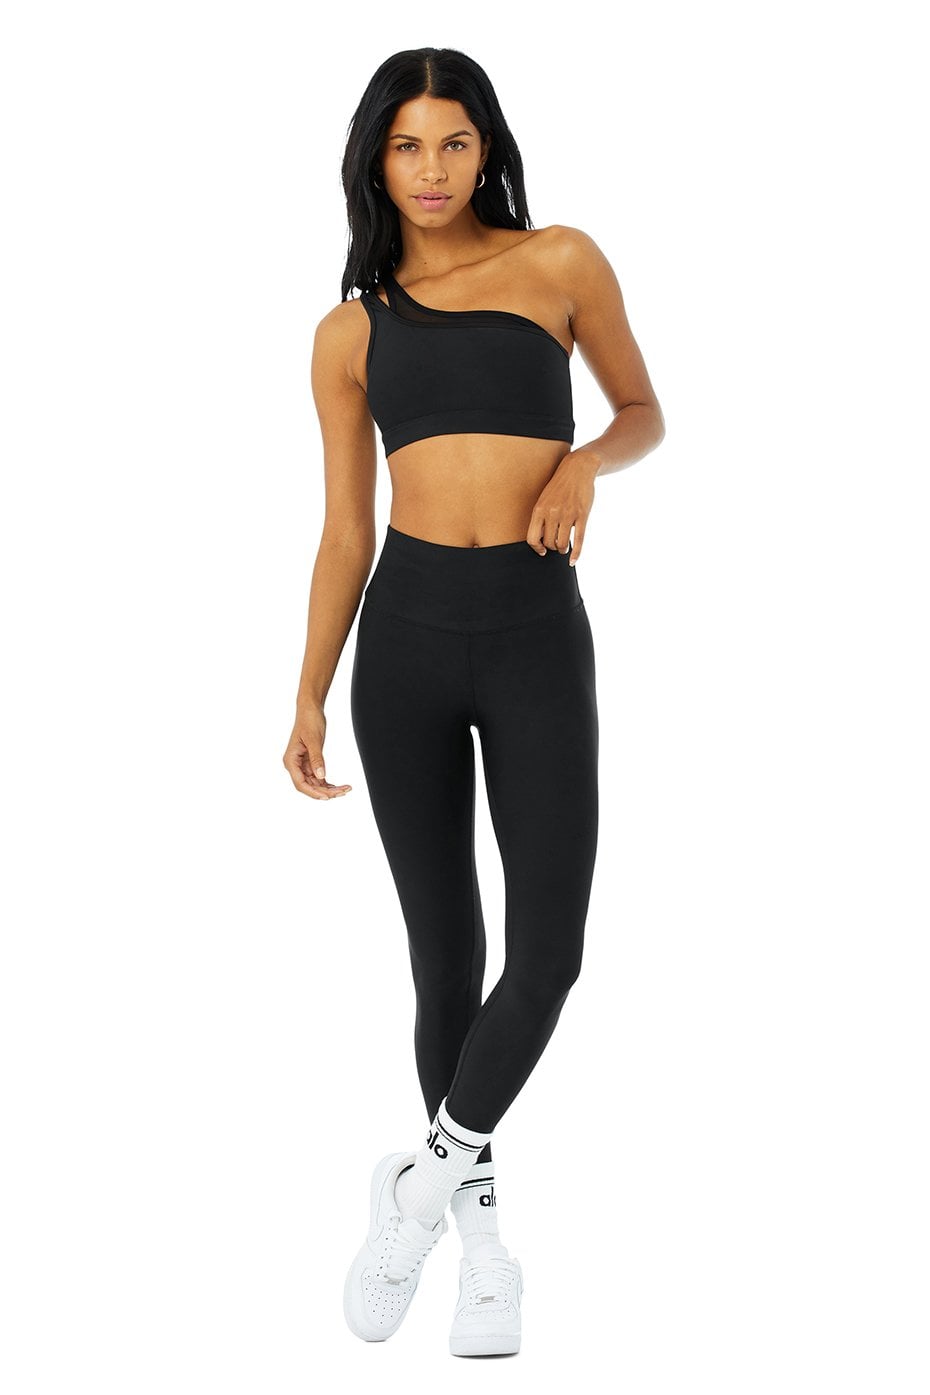 Alo Airlift Excite Bra & High-Waist Airlift Legging Set, Alo Has a Bunch  of Cute Sets You Can Both Work Out and Lounge In